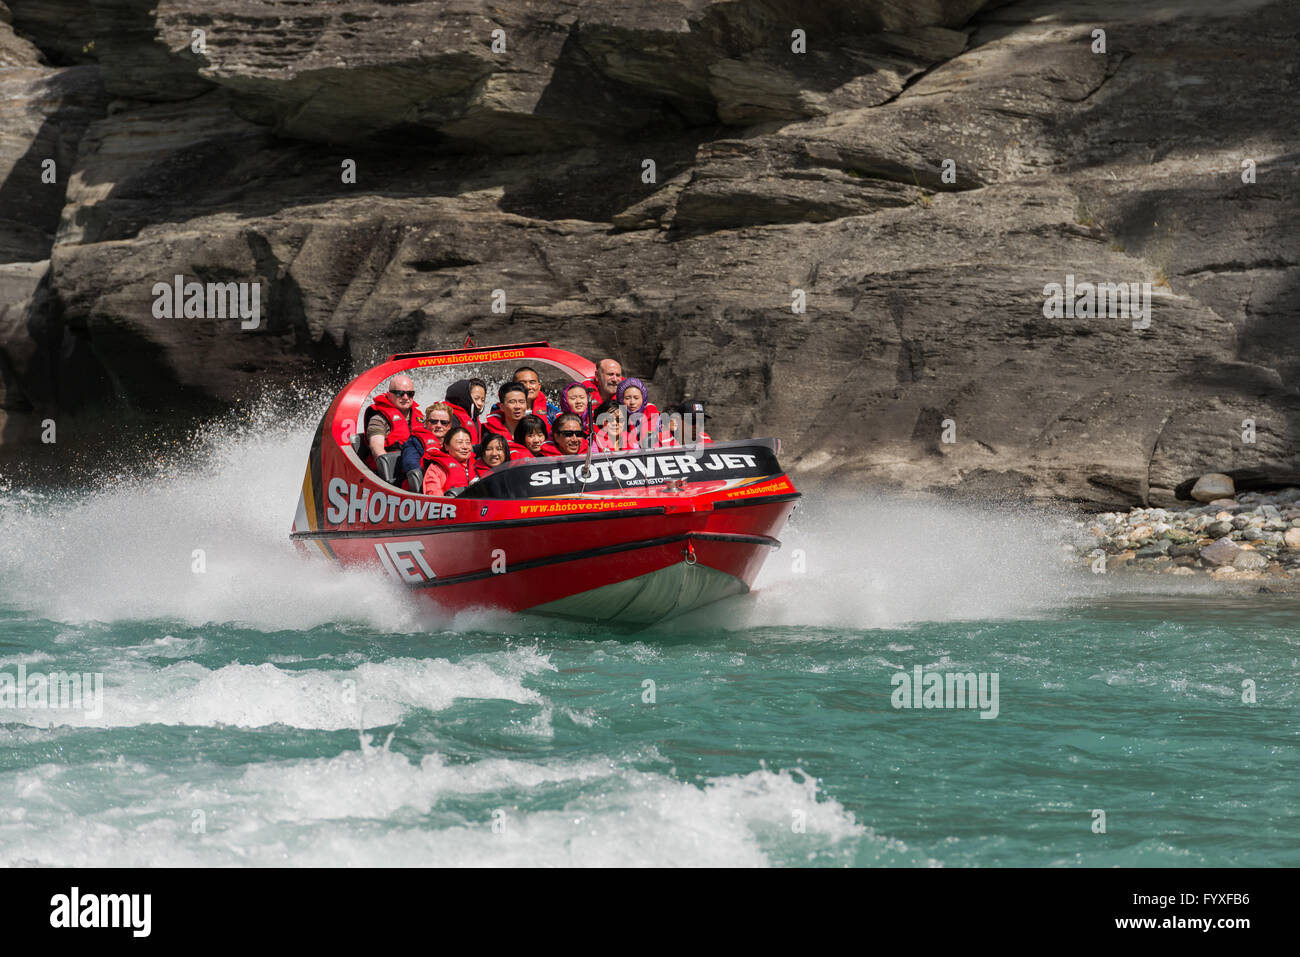 Group of tourists Jet boating on Shotover River at Arthurs Point, Queenstown, Otago, New Zealand's South Island. Stock Photo